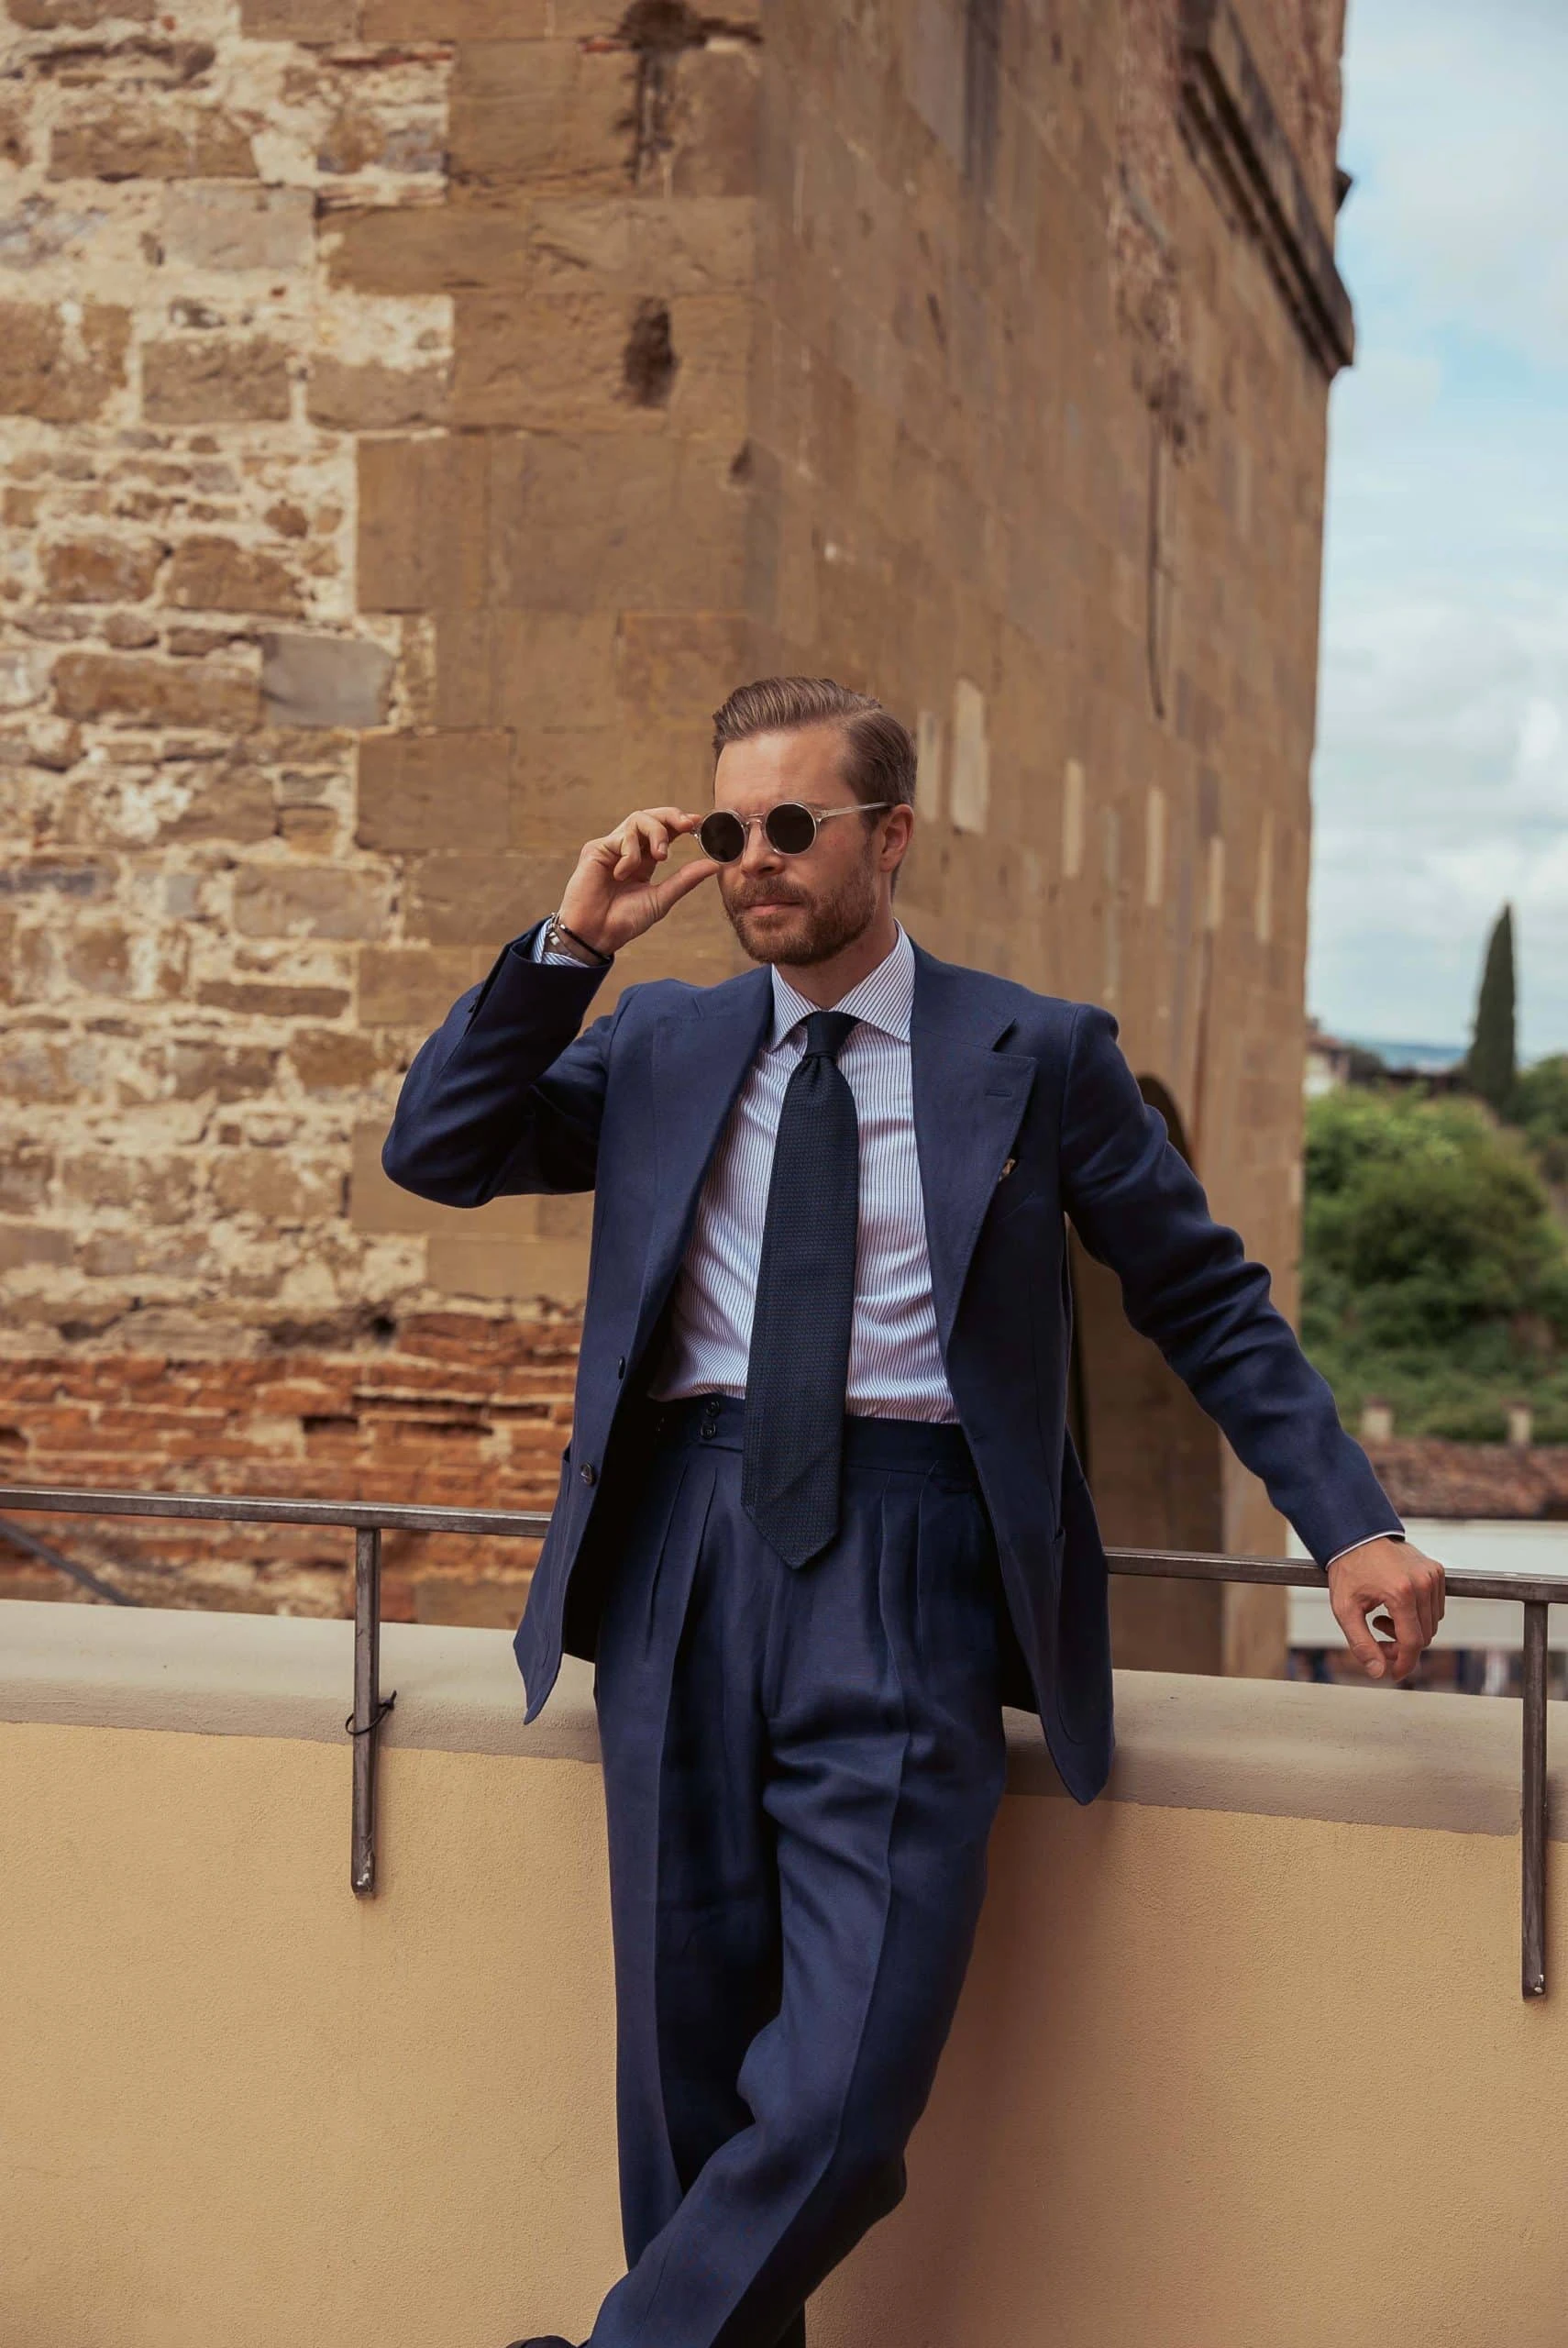 Johan Wikstrøm spotted wearing a navy blue linen suit at Pitti Uomo